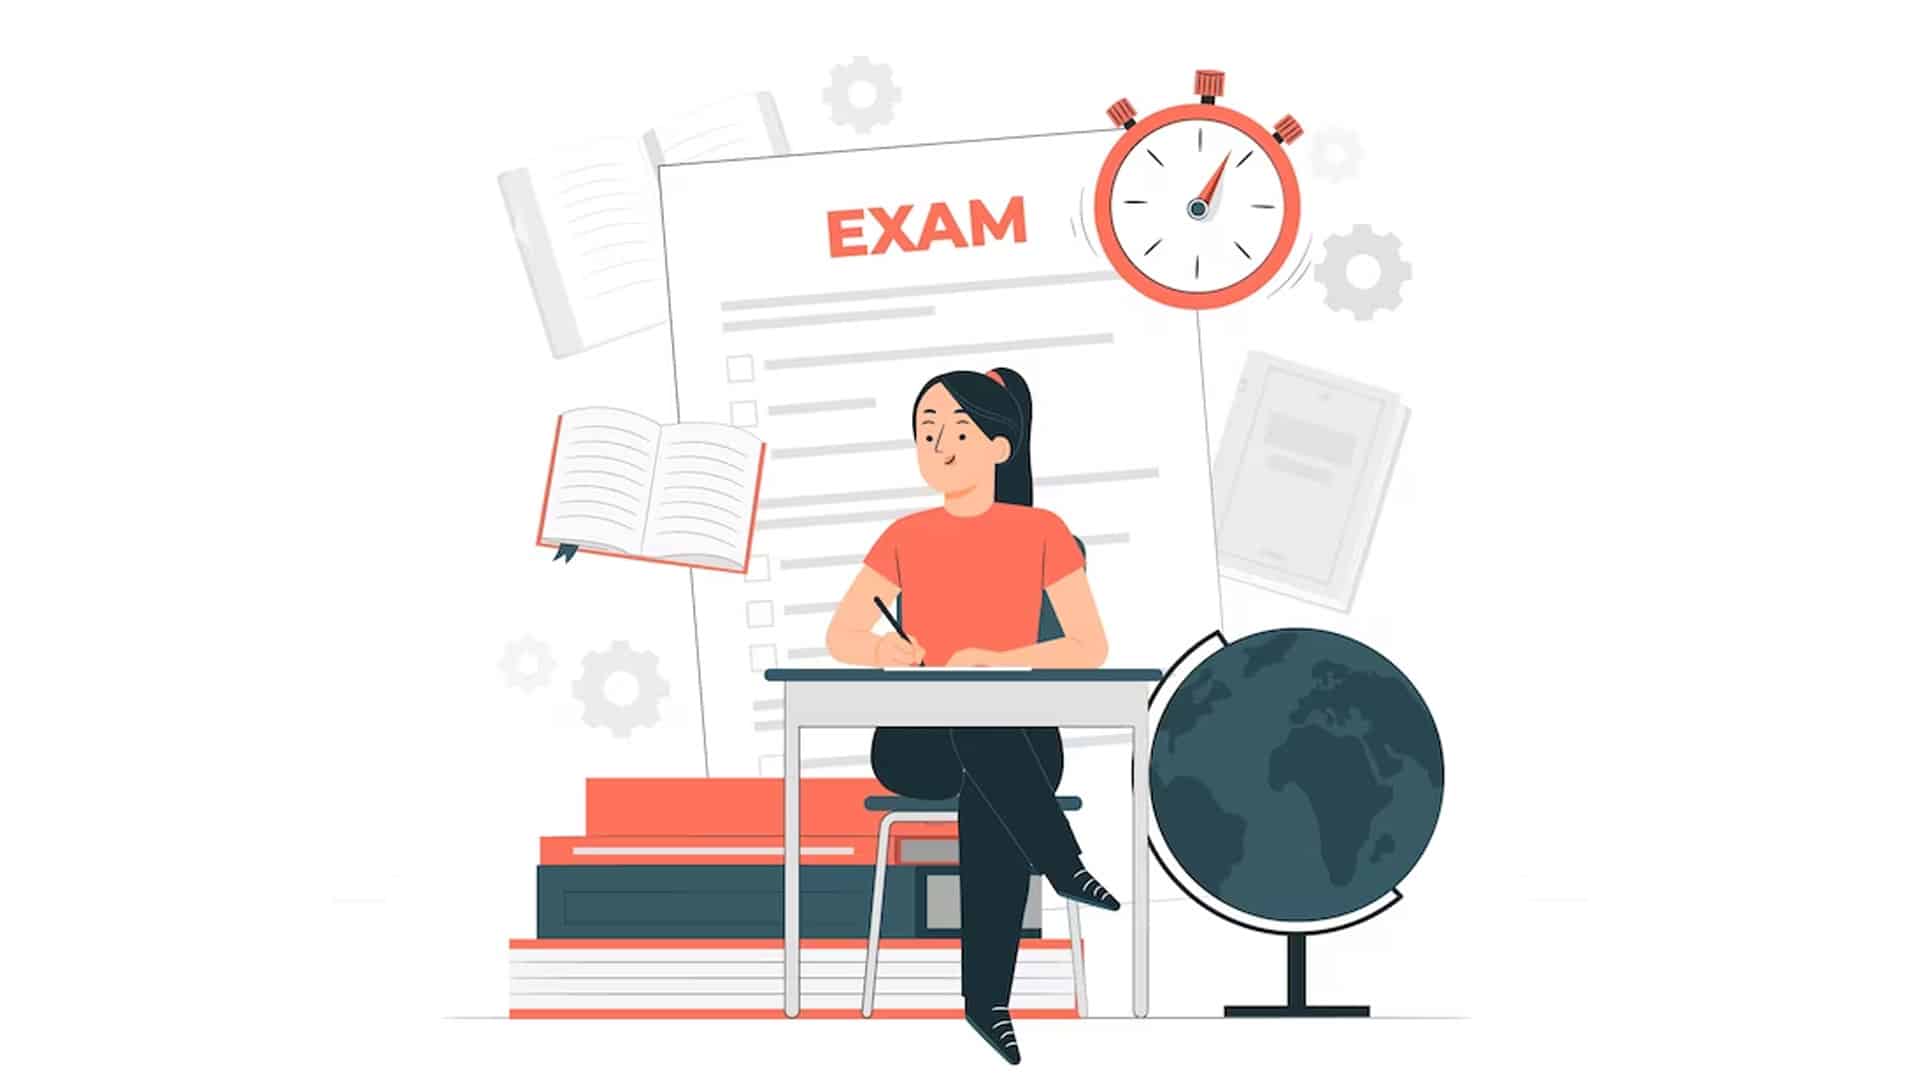 Exams illustration, a girl is taking her exams